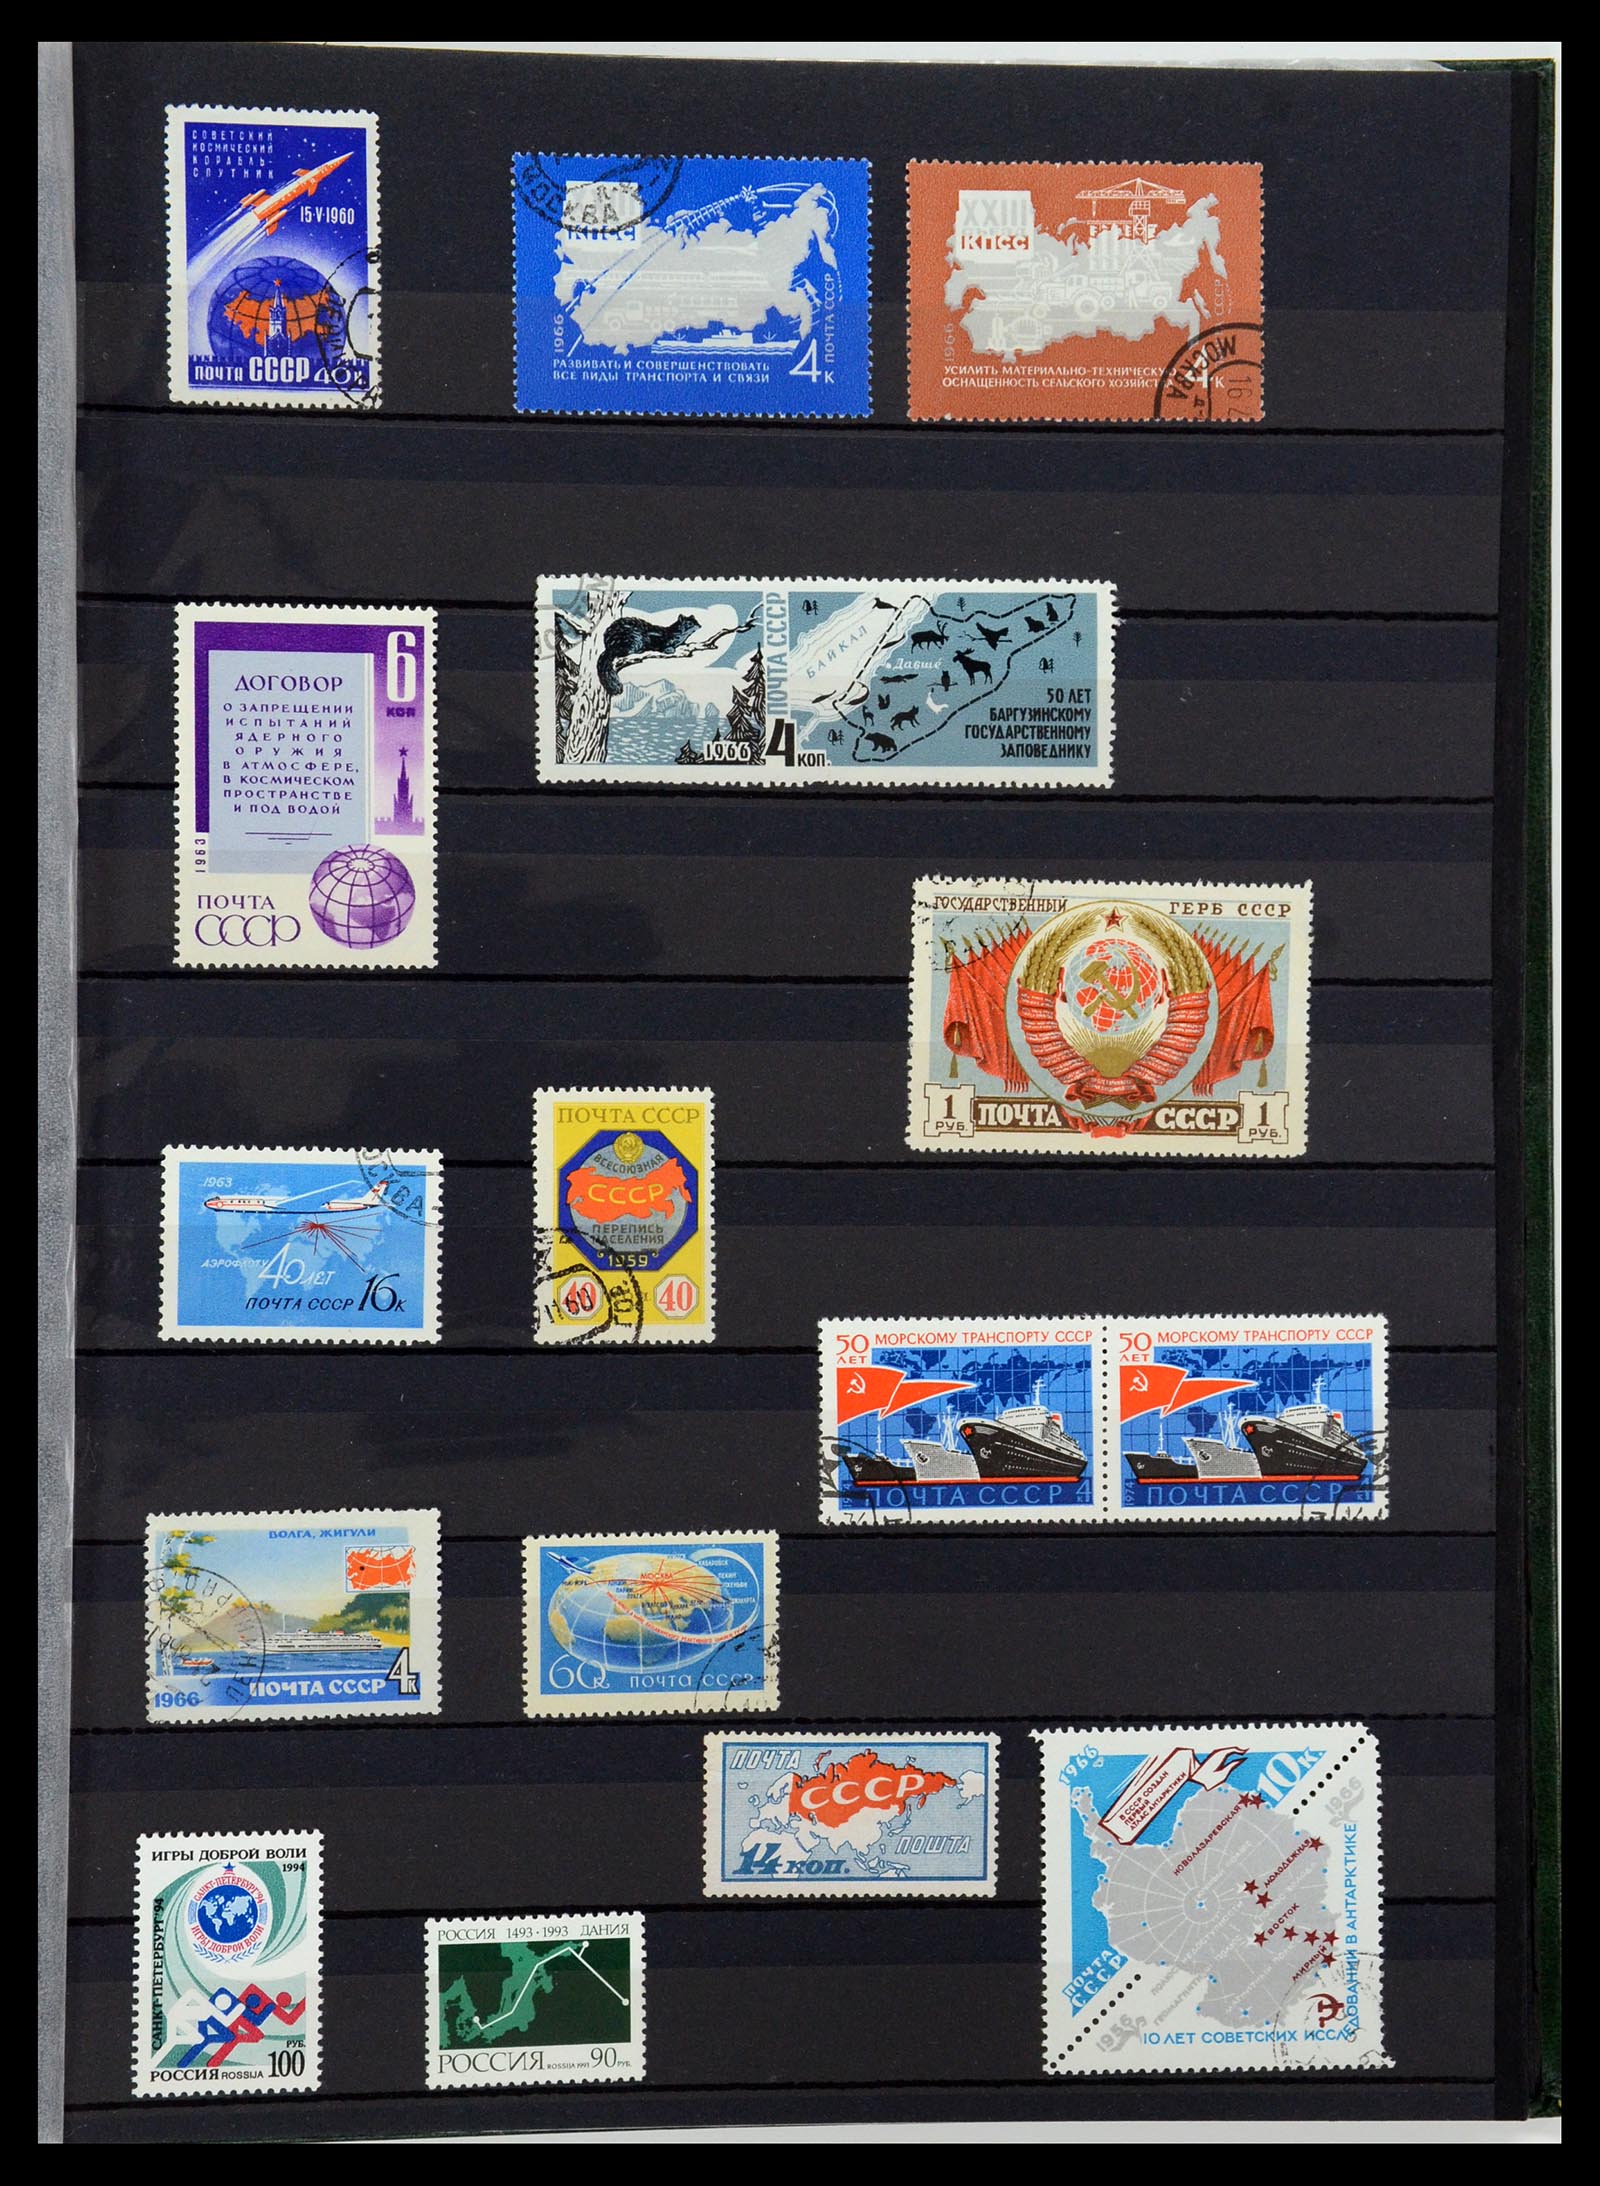 36238 083 - Stamp collection 36238 Motif maps 1900-2000.